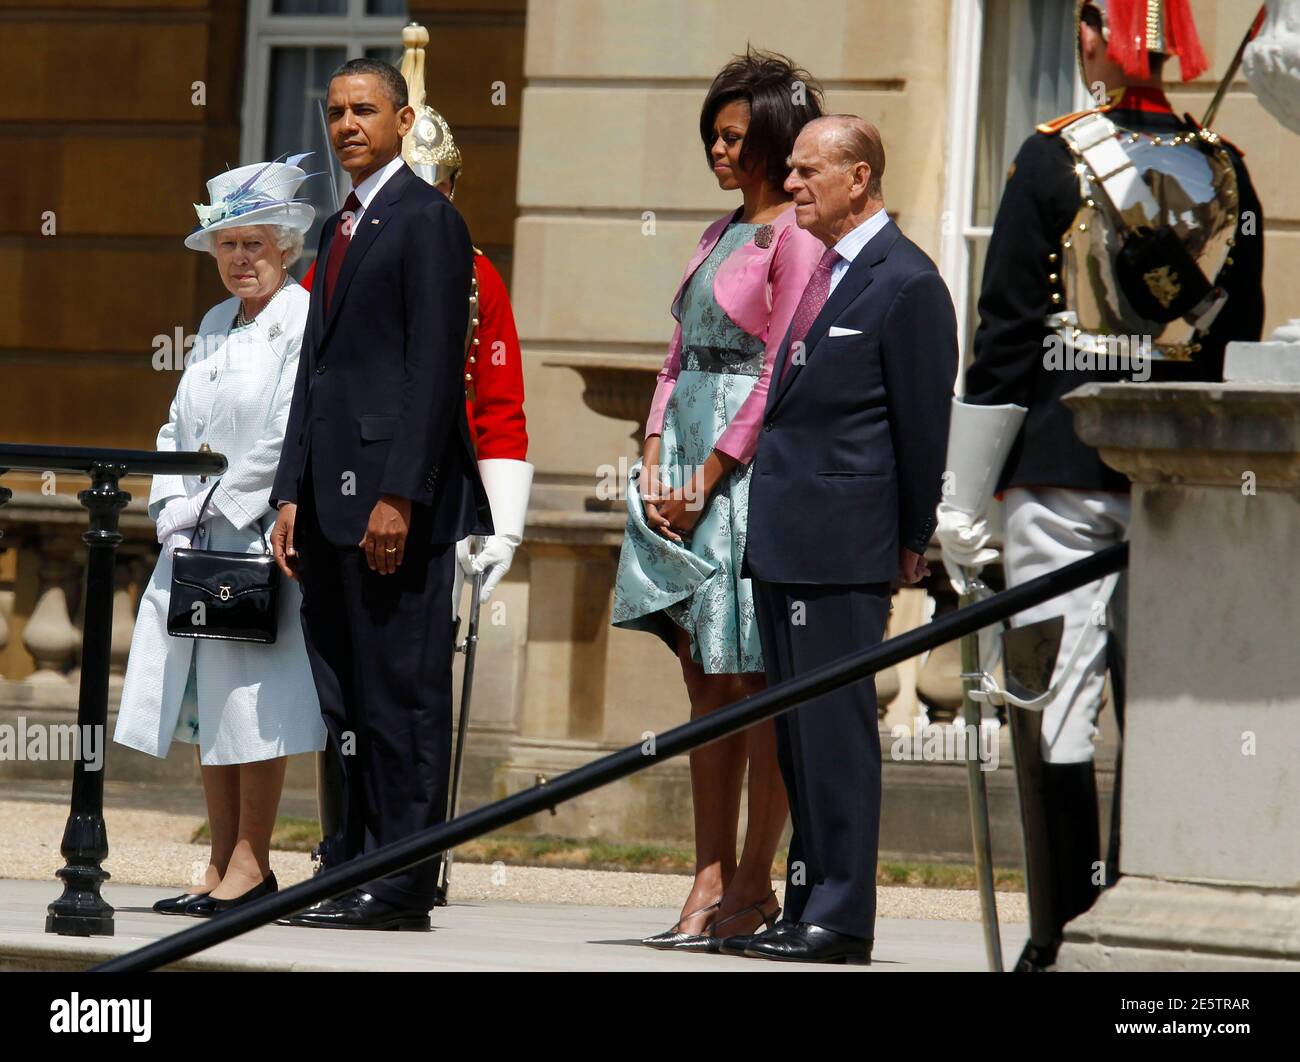 U.S. President Barack Obama (2nd L), first lady Michelle Obama (3rd R), Queen Elizabeth II (L) and Prince Phillip, Duke of Edinburg (2nd R), participate in an official arrival ceremony on the Buckingham Palace Terrace stairs in London May 24, 2011.         REUTERS/Larry Downing      (BRITAIN - Tags: POLITICS) Stock Photo